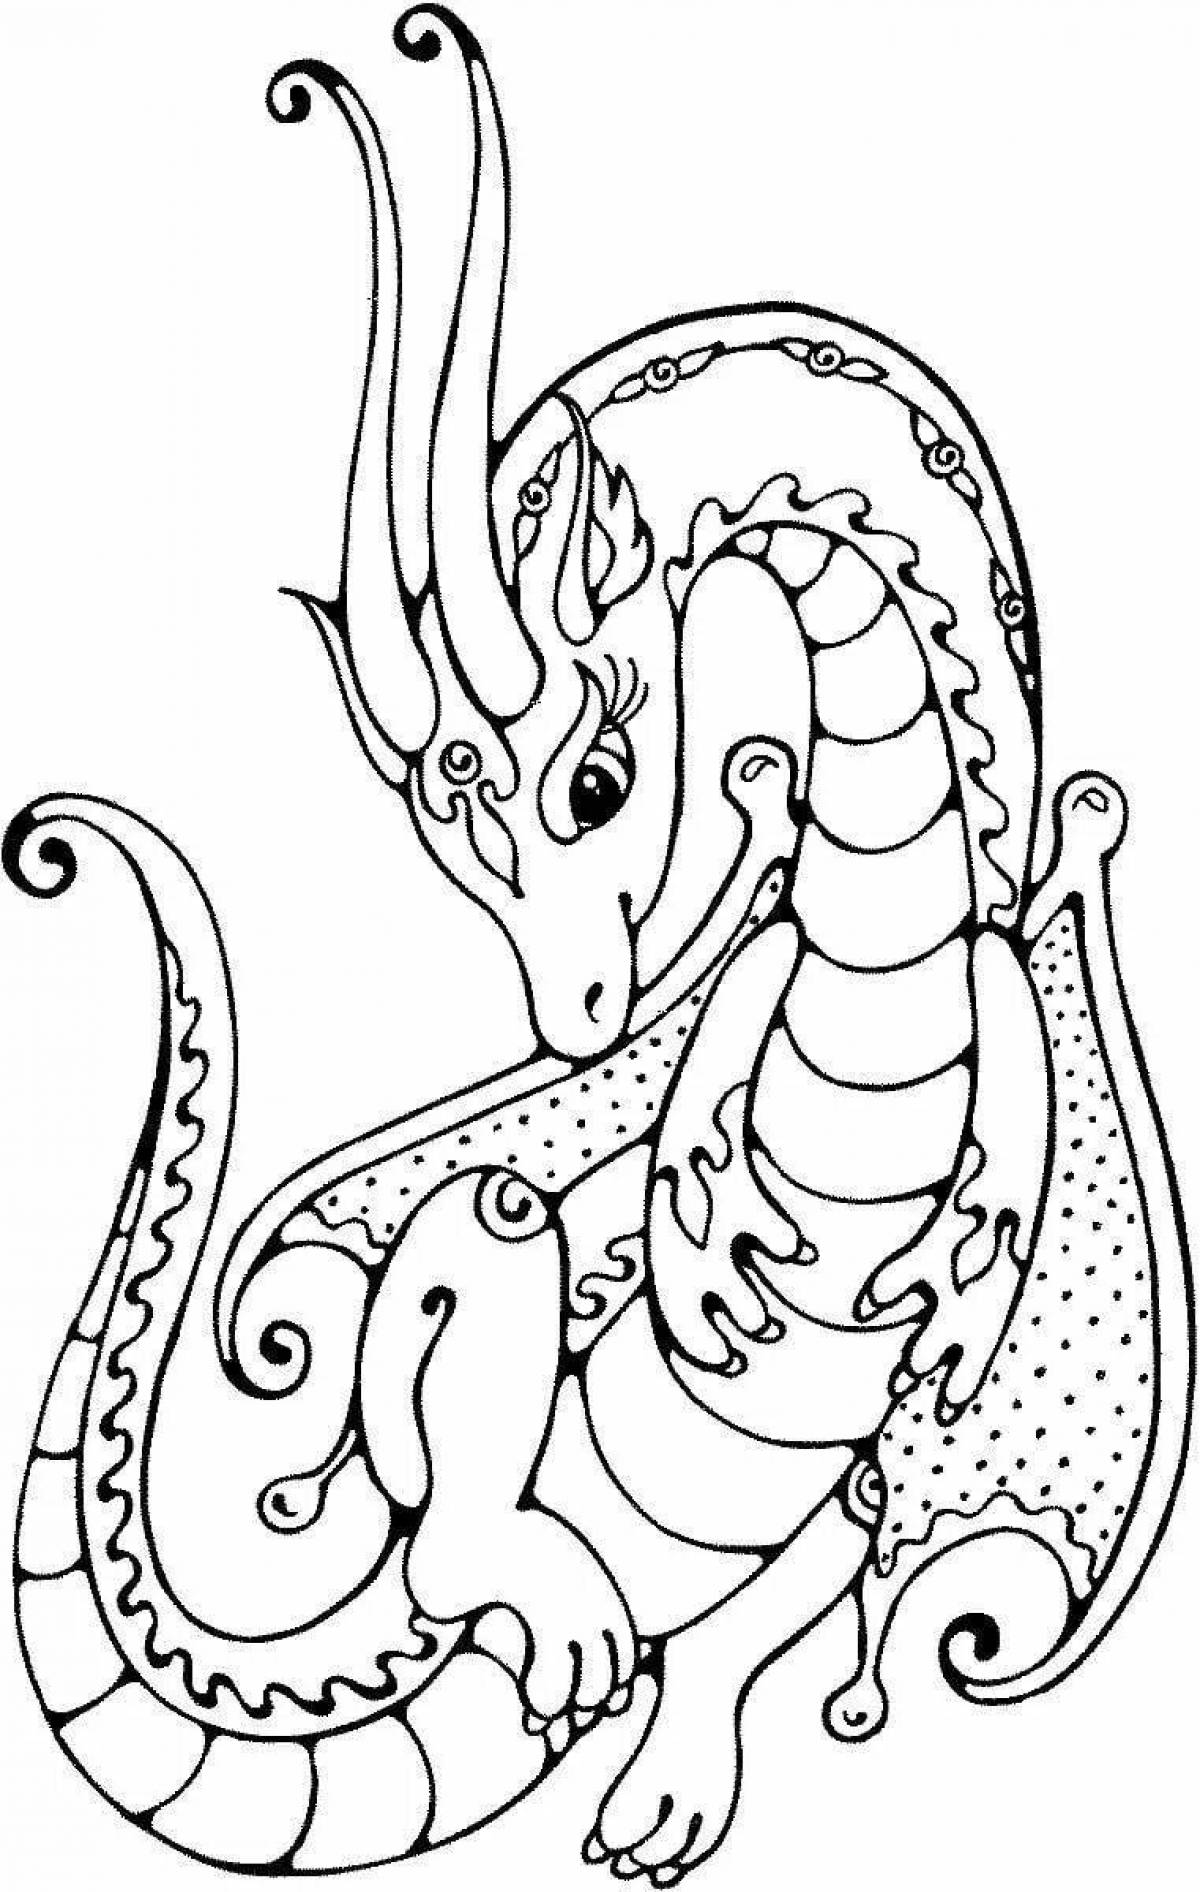 Luxury coloring drawing of a dragon